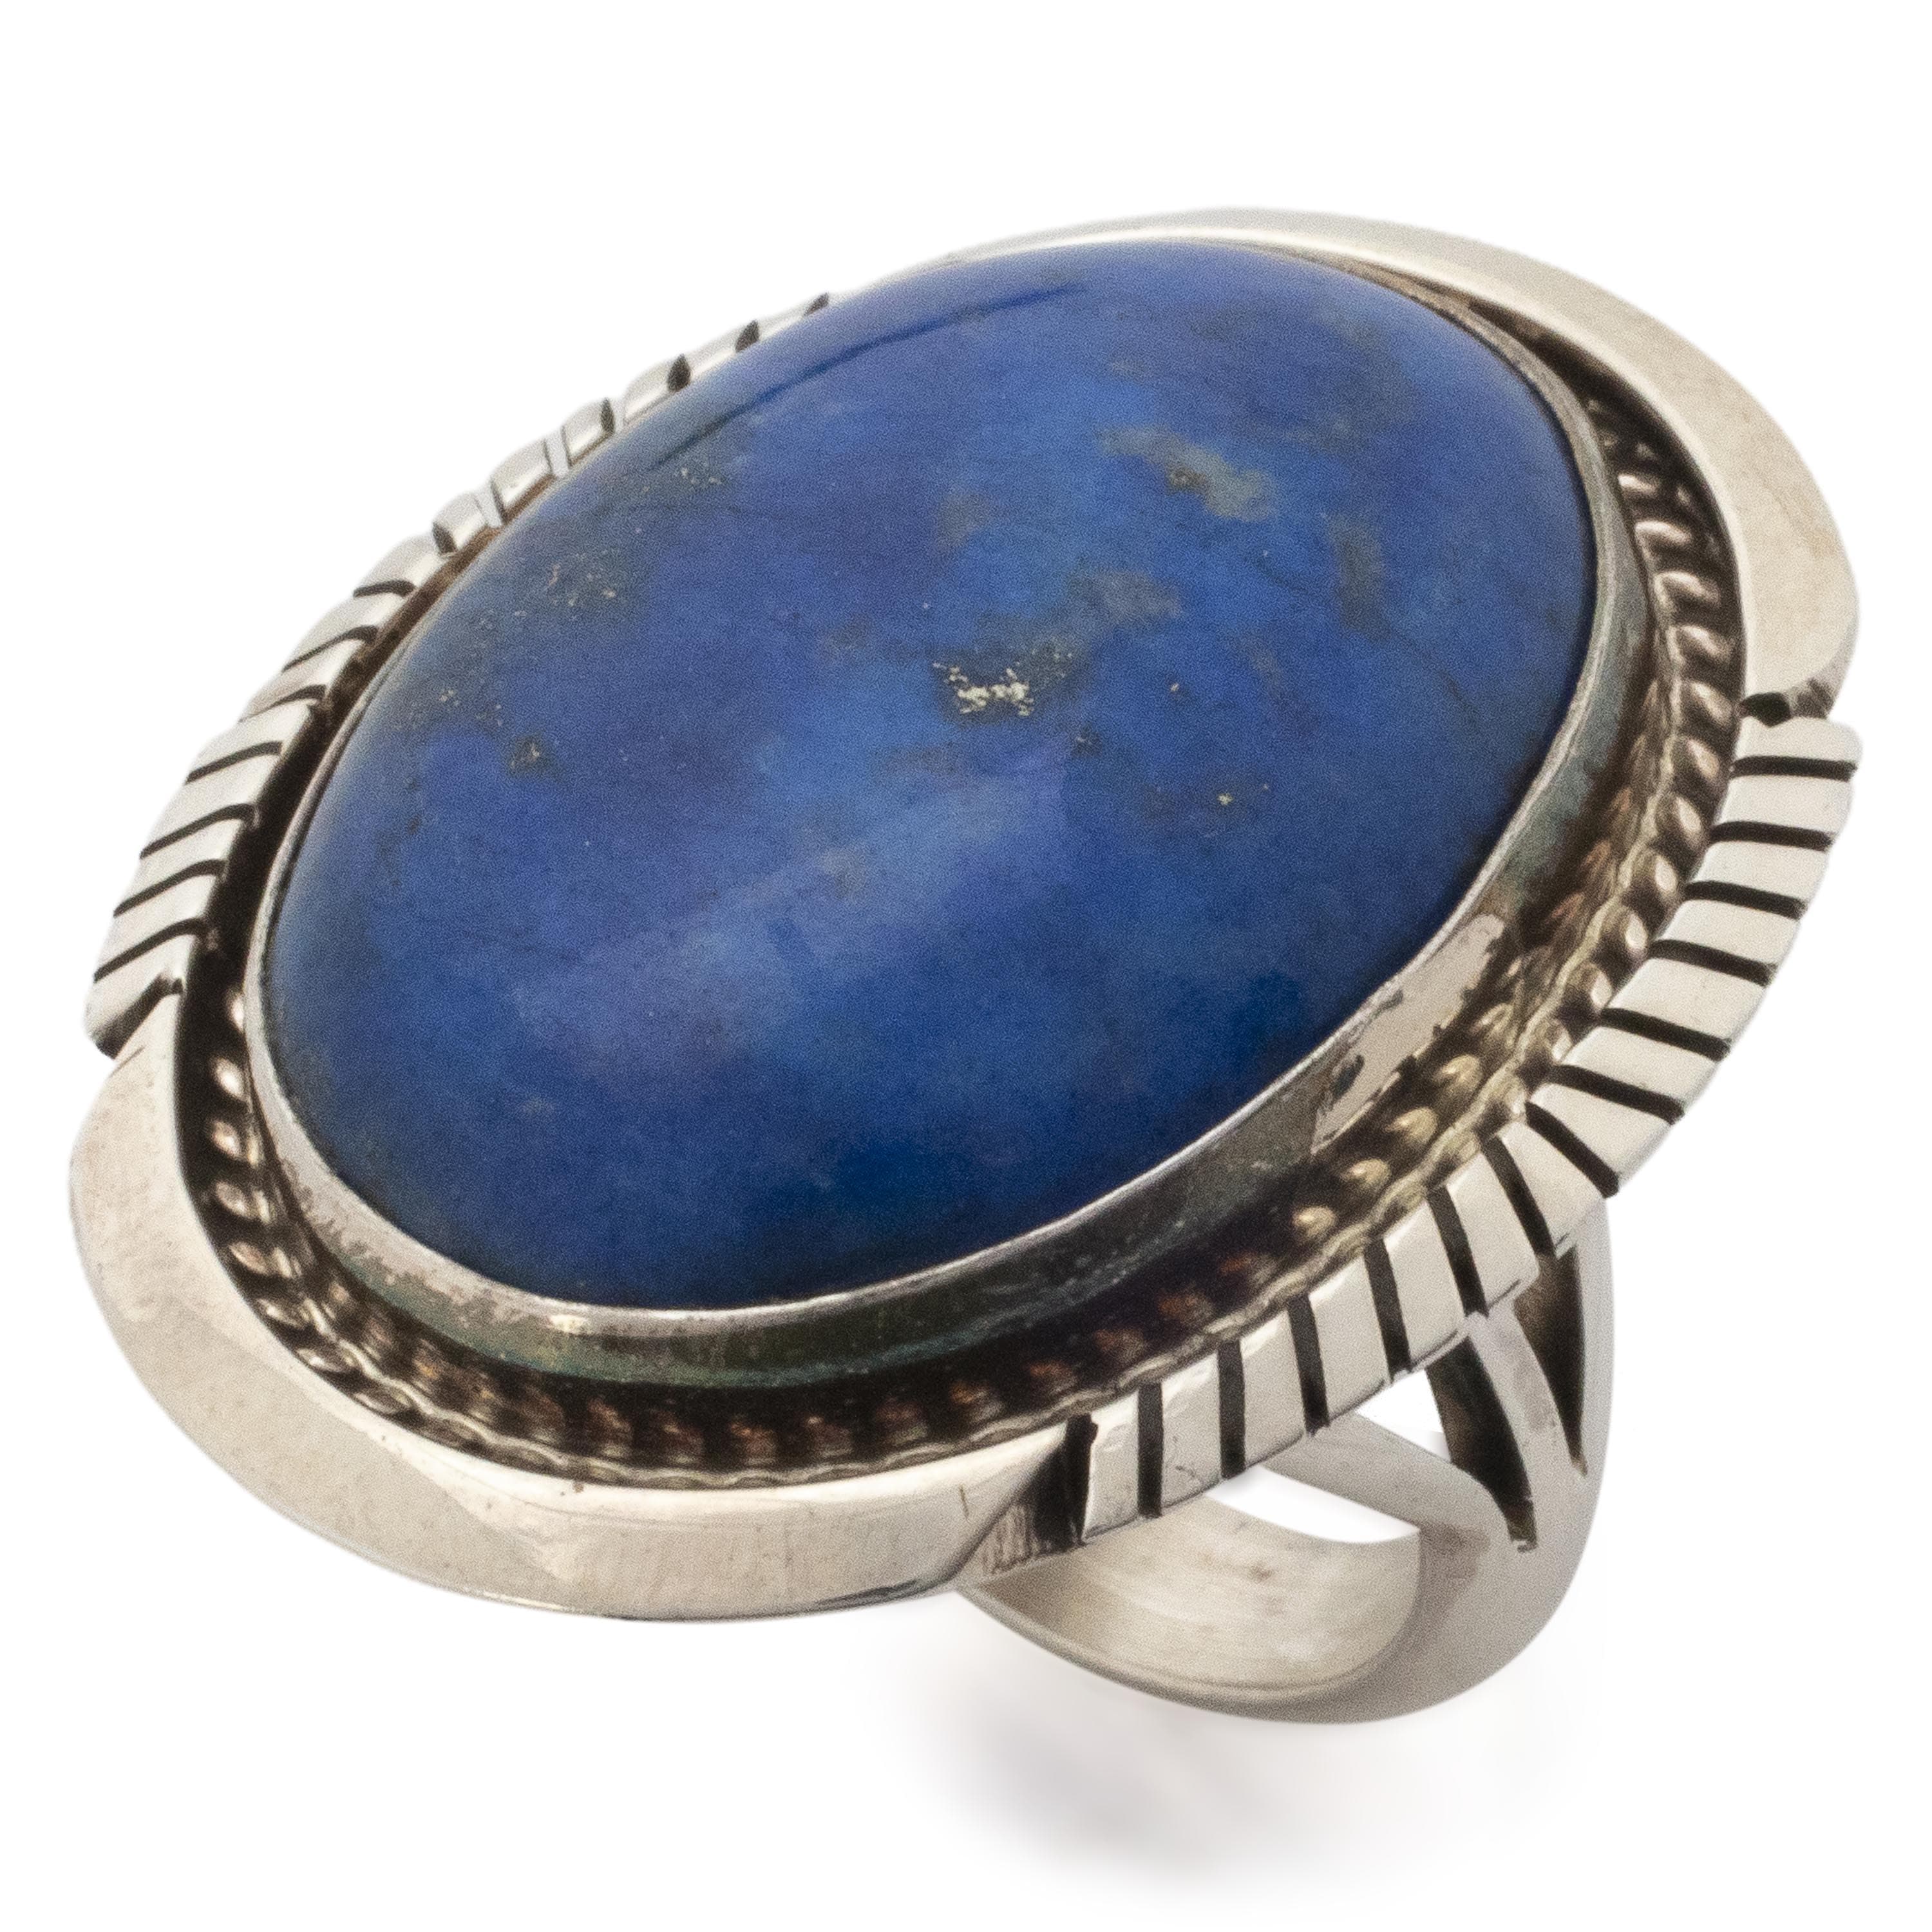 Kalifano Native American Jewelry 6 Alfred Martinez Navajo Lapis USA Native American Made 925 Sterling Silver Ring NAR1200.044.6